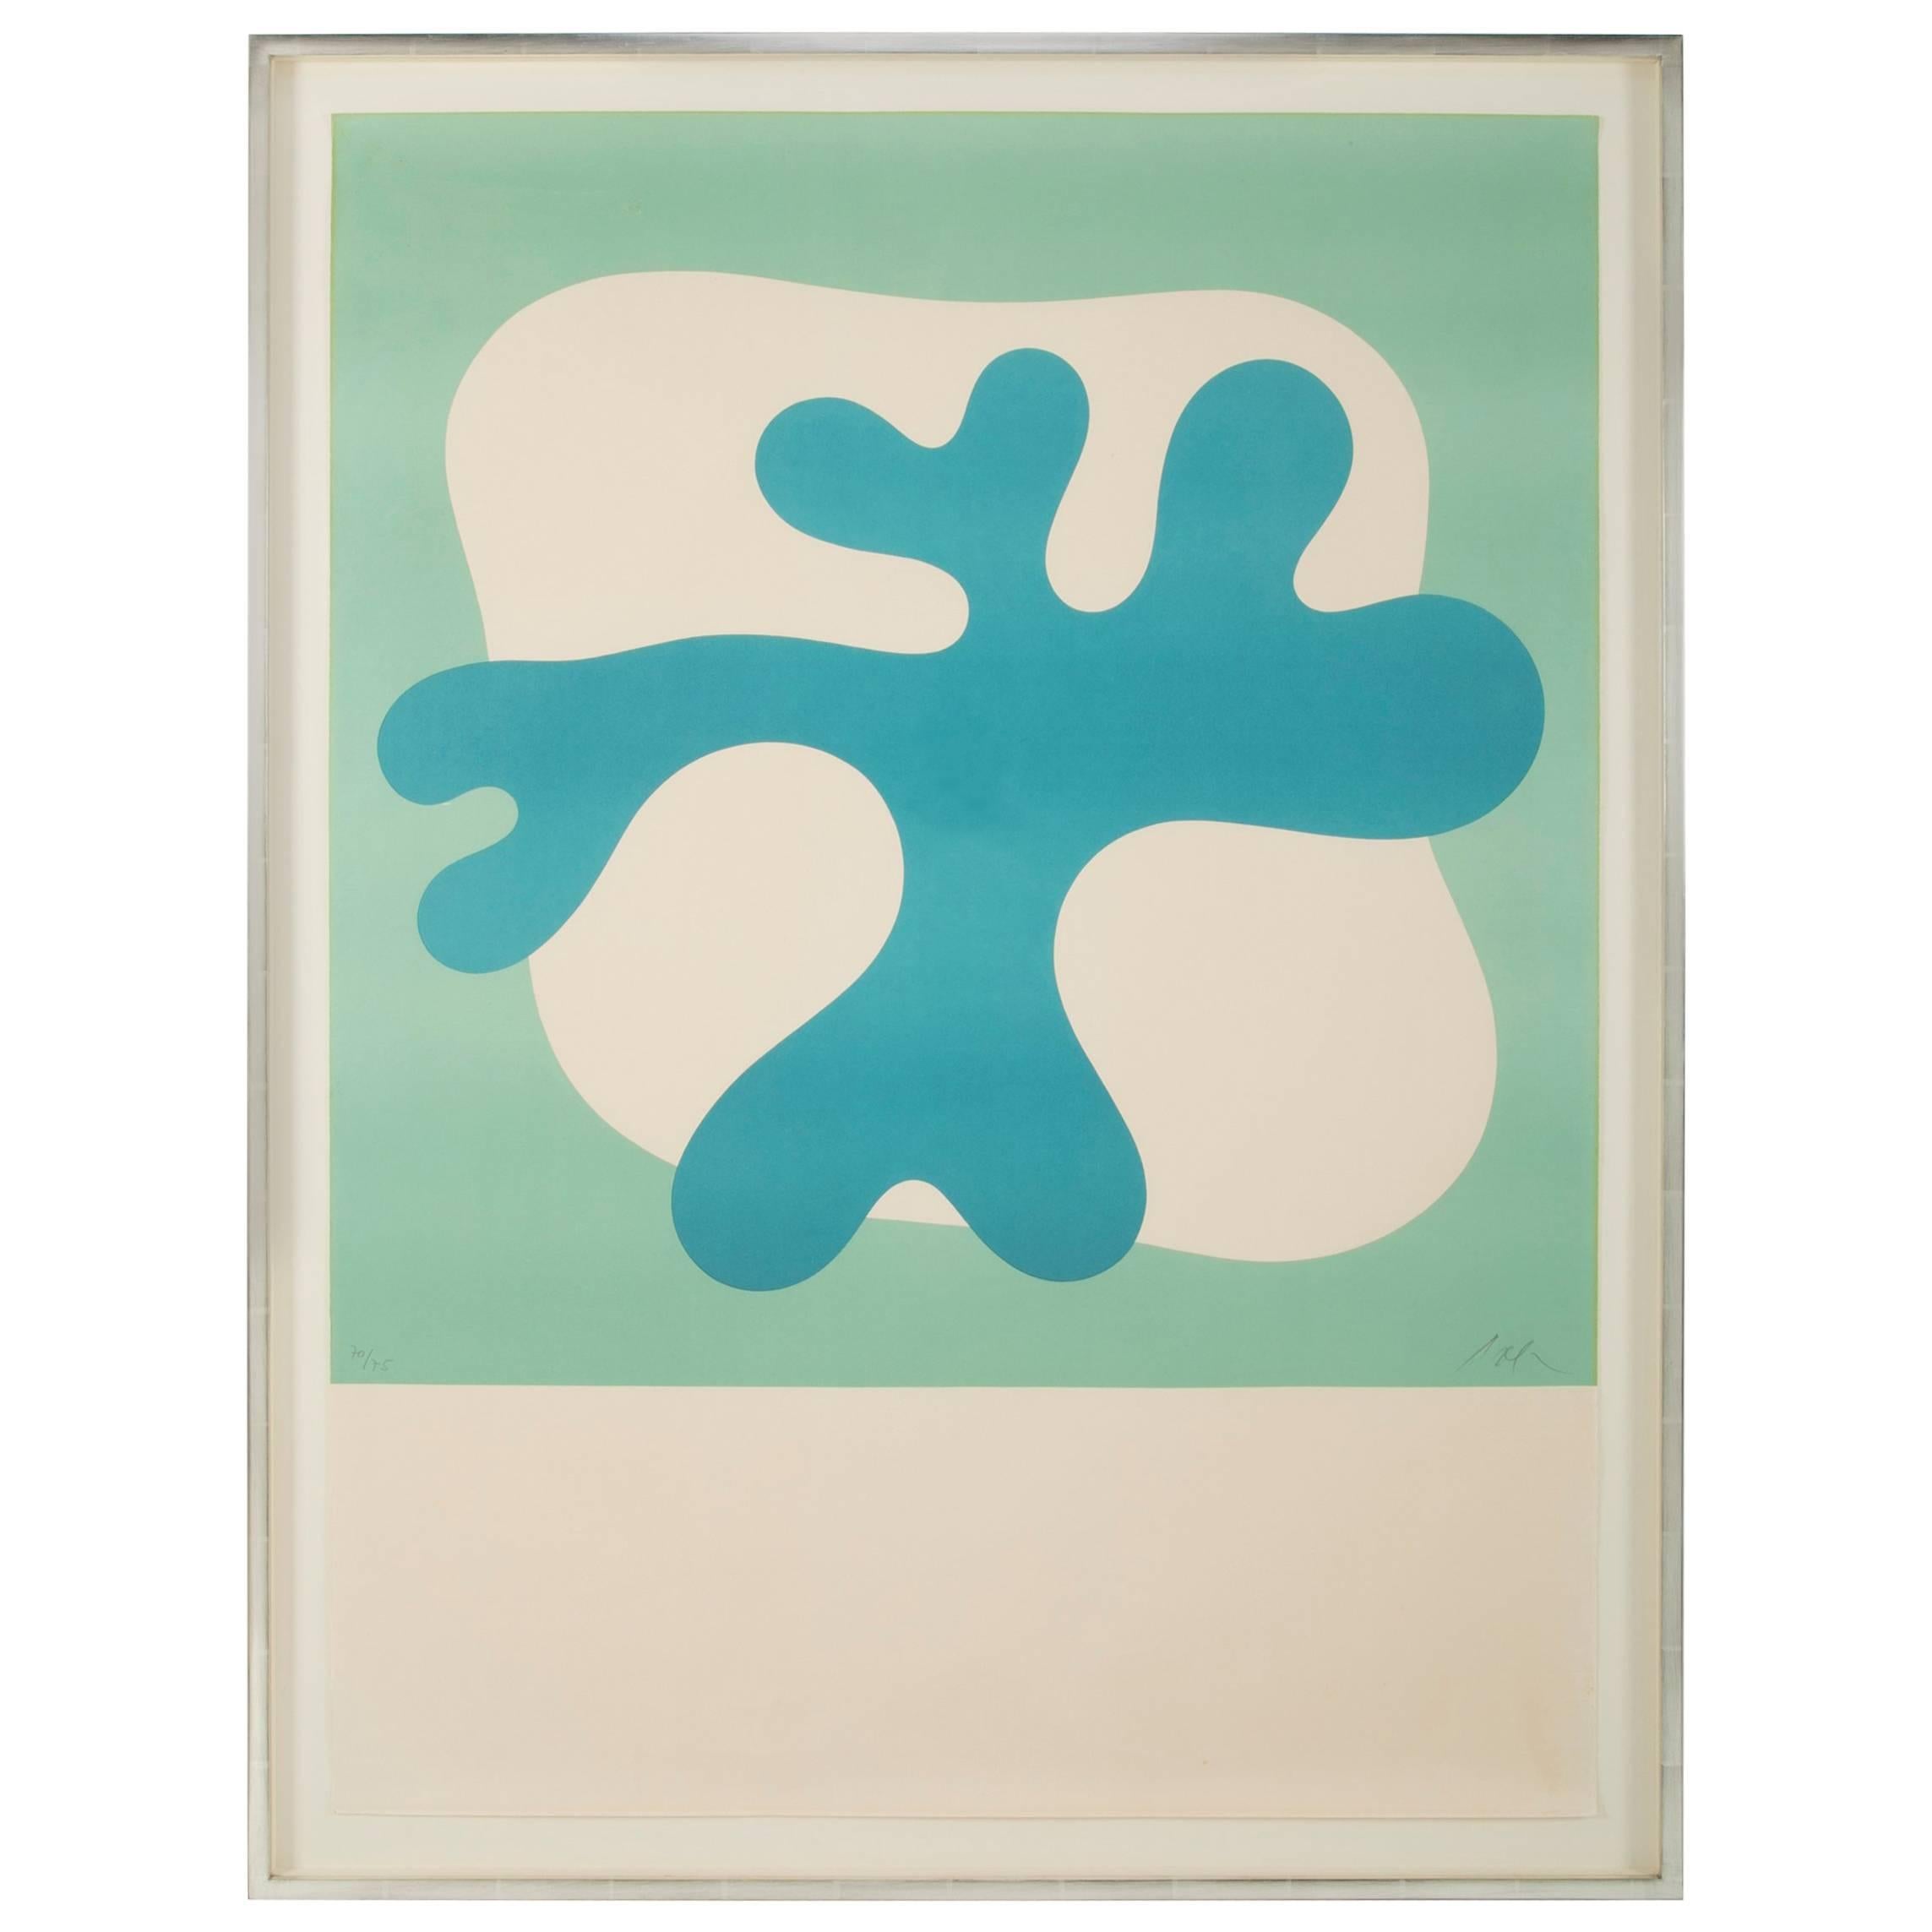 Large Lithograph by Jean Arp Signed and Numbered